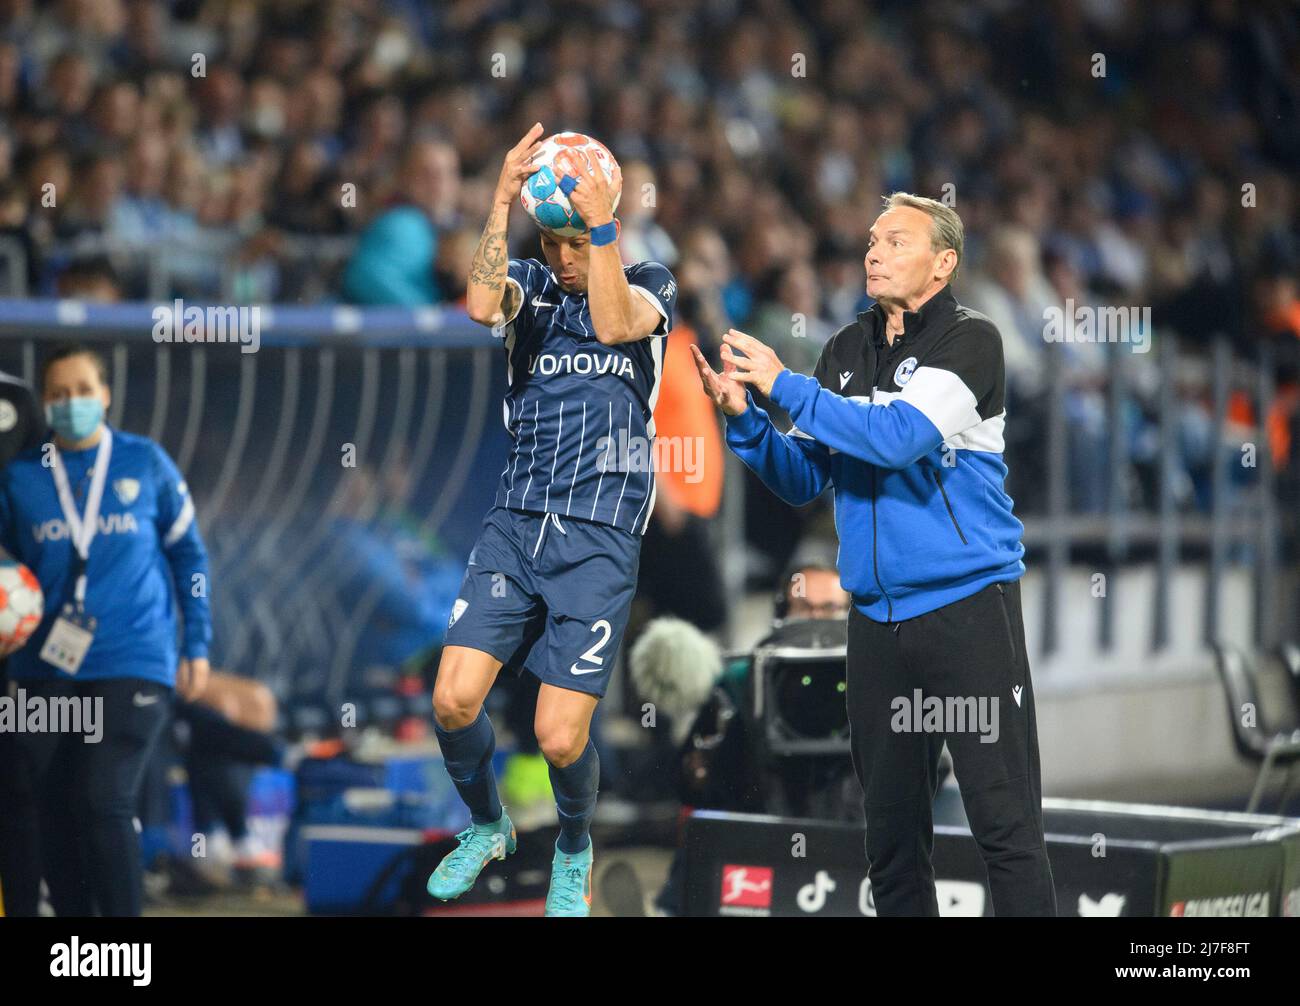 strange situation, coach Marco KOSTMANN (BI) would like to catch a ball but Cristian GAMBOA l. (BO) comes before him Soccer 1. Bundesliga, 33rd matchday, VfL Bochum (BO) - Arminia Bielefeld (BI) 2: 1, on 05/06/2022 in Bochum/Germany. #DFL regulations prohibit any use of photographs as image sequences and/or quasi-video # Â Stock Photo